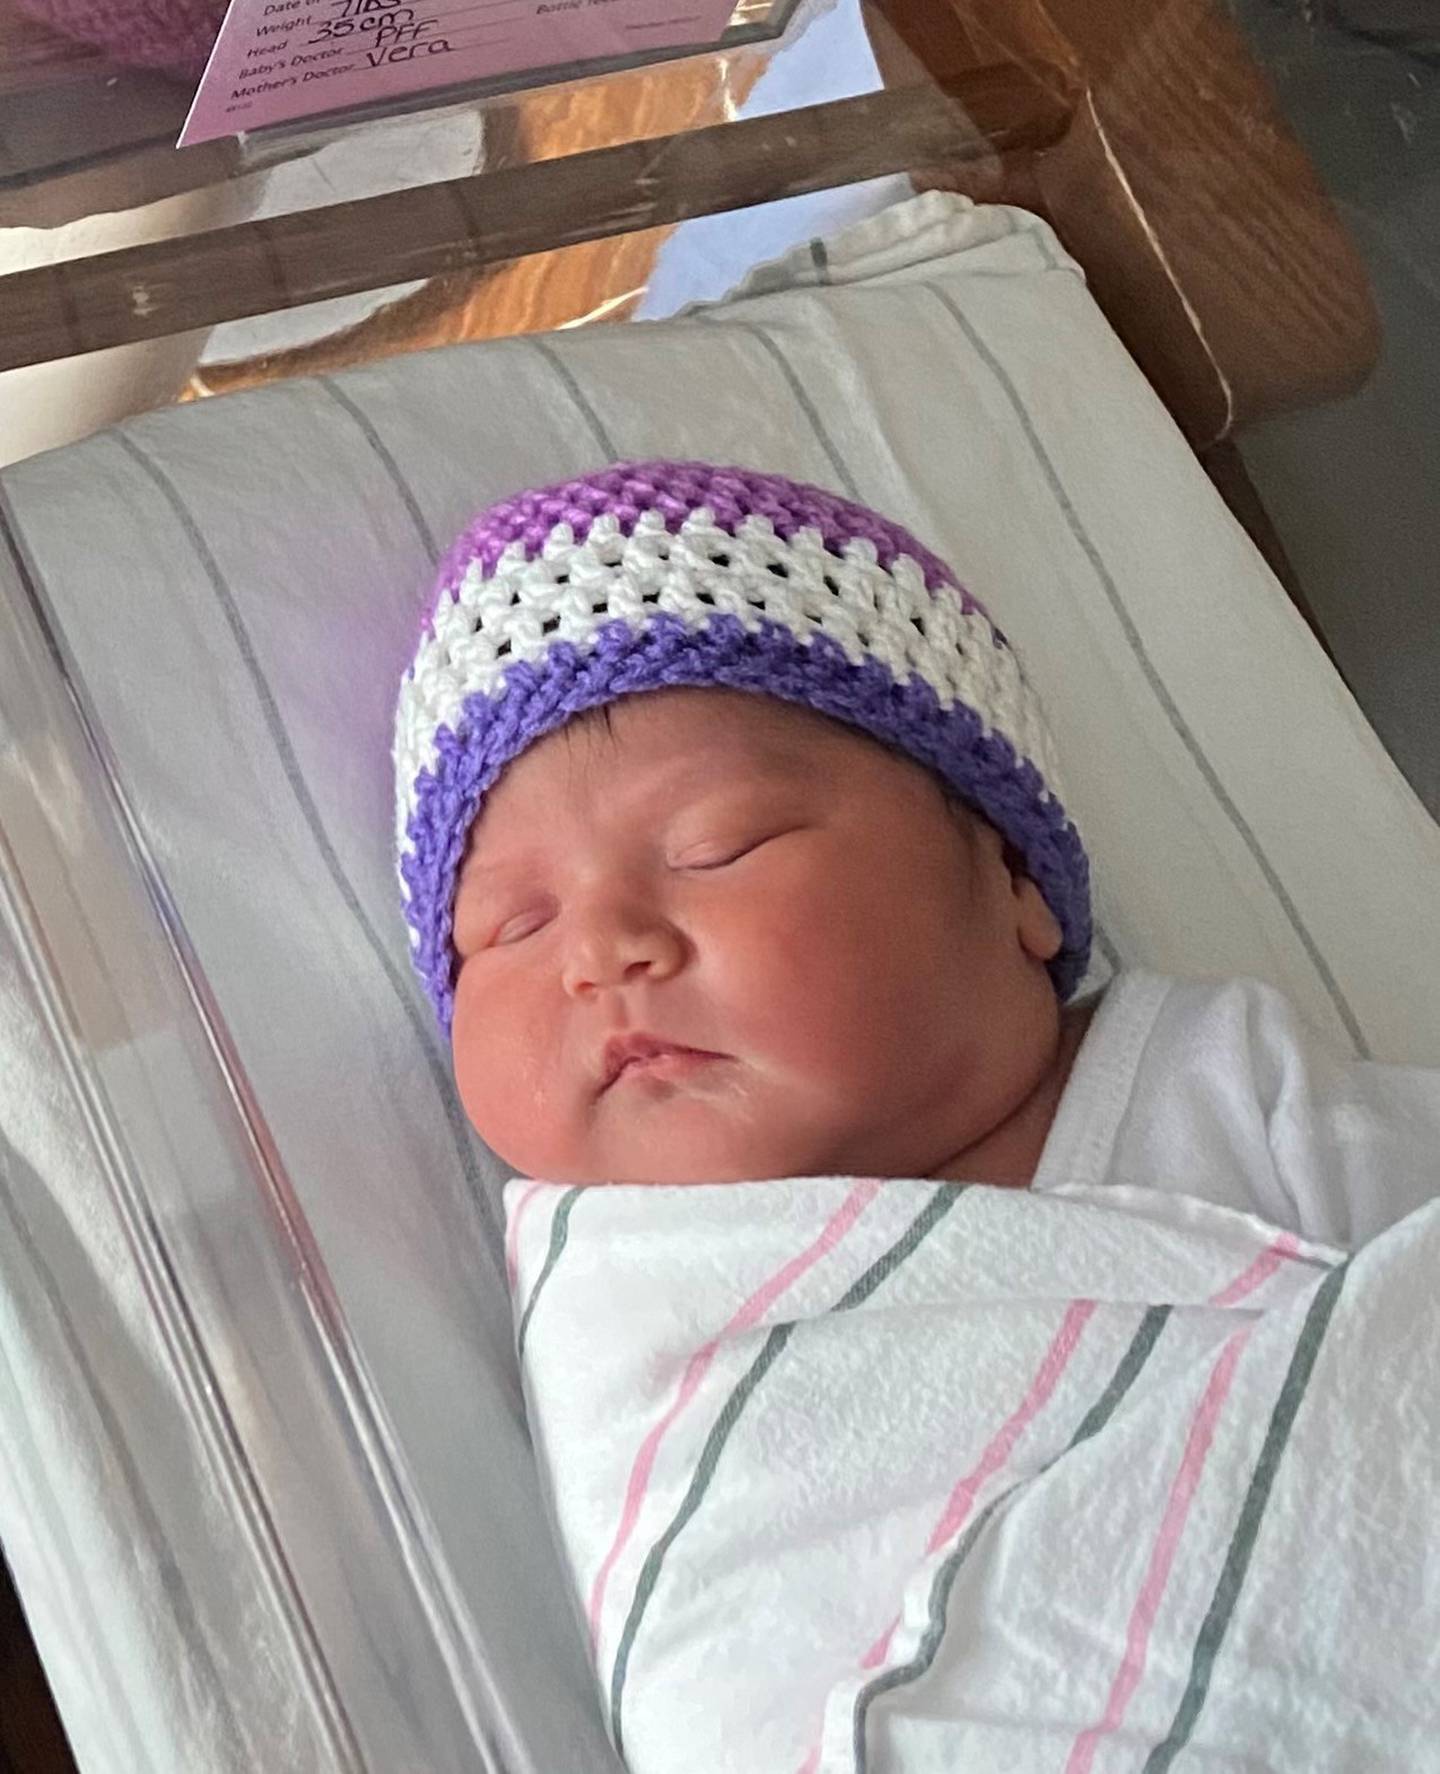 Amanda and Benny Avila of Joliet welcomed their daughter at 1:55 a.m. Jan. 1 at Silver Cross Hospital in New Lenox. Baby Girl Avila weighed 7 pounds, 9 ounces and measured 20.5 inches long.